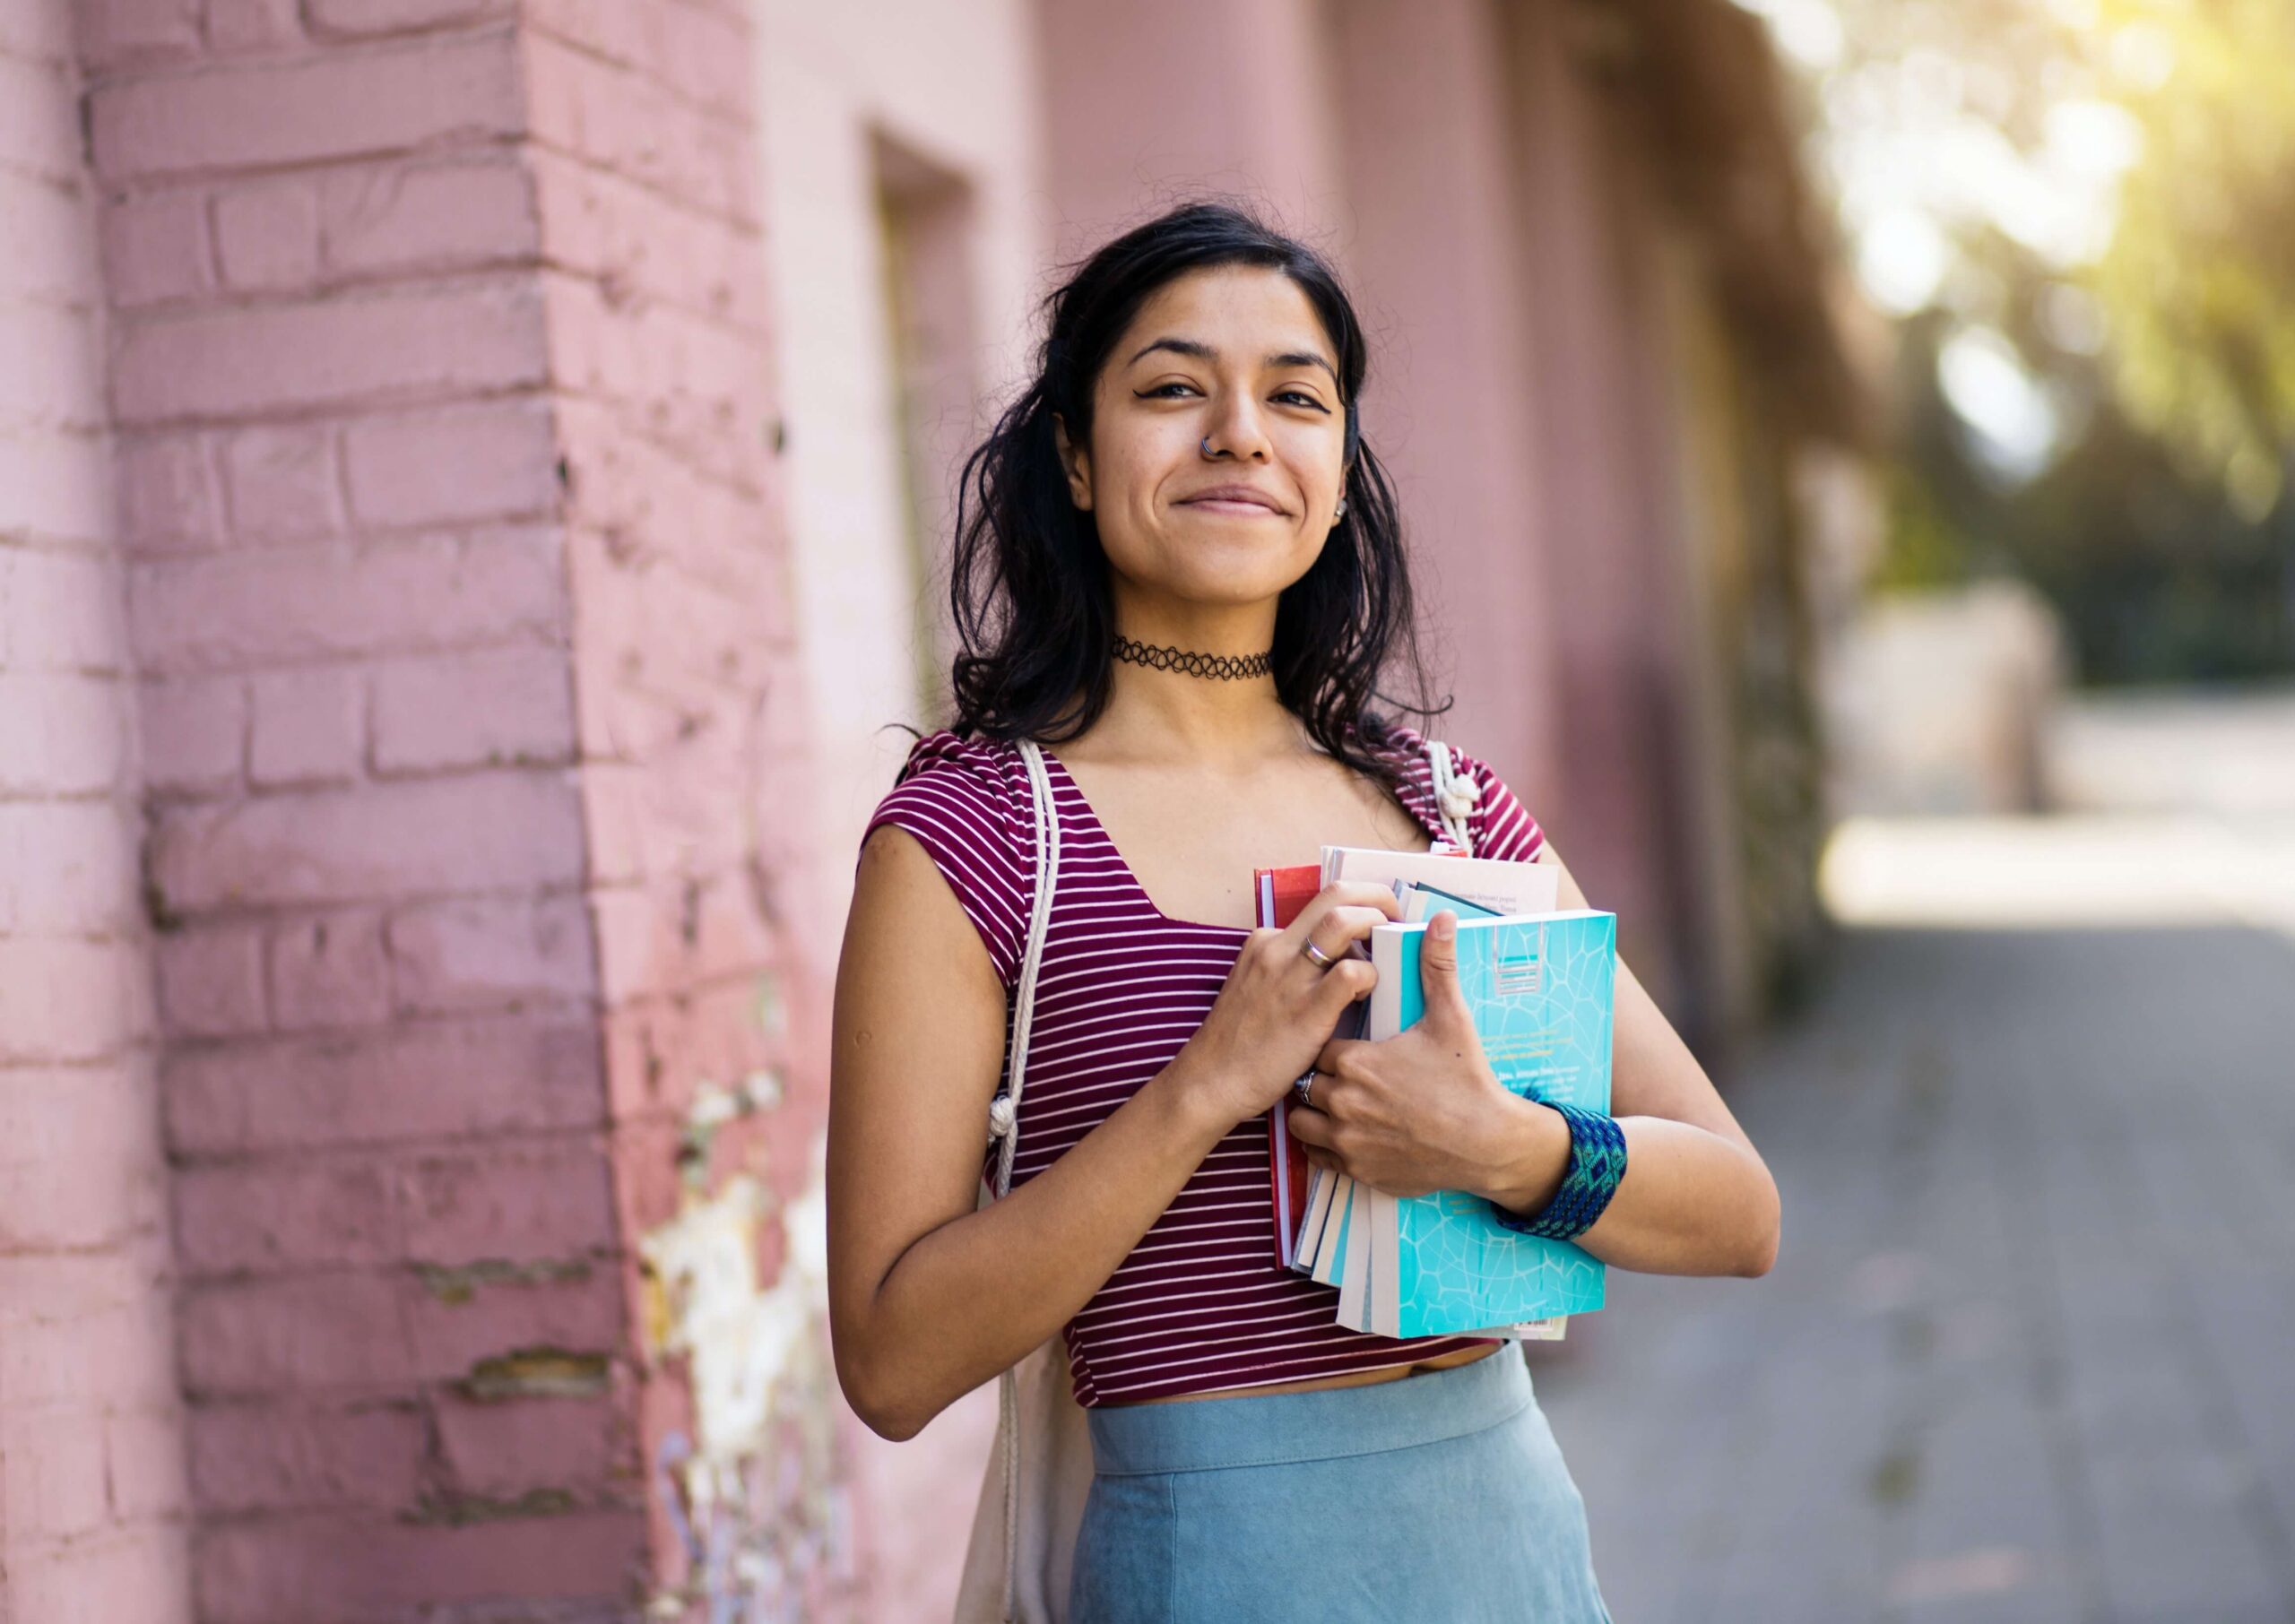 A student smiling outside and holding a stack of books on a sunny day.